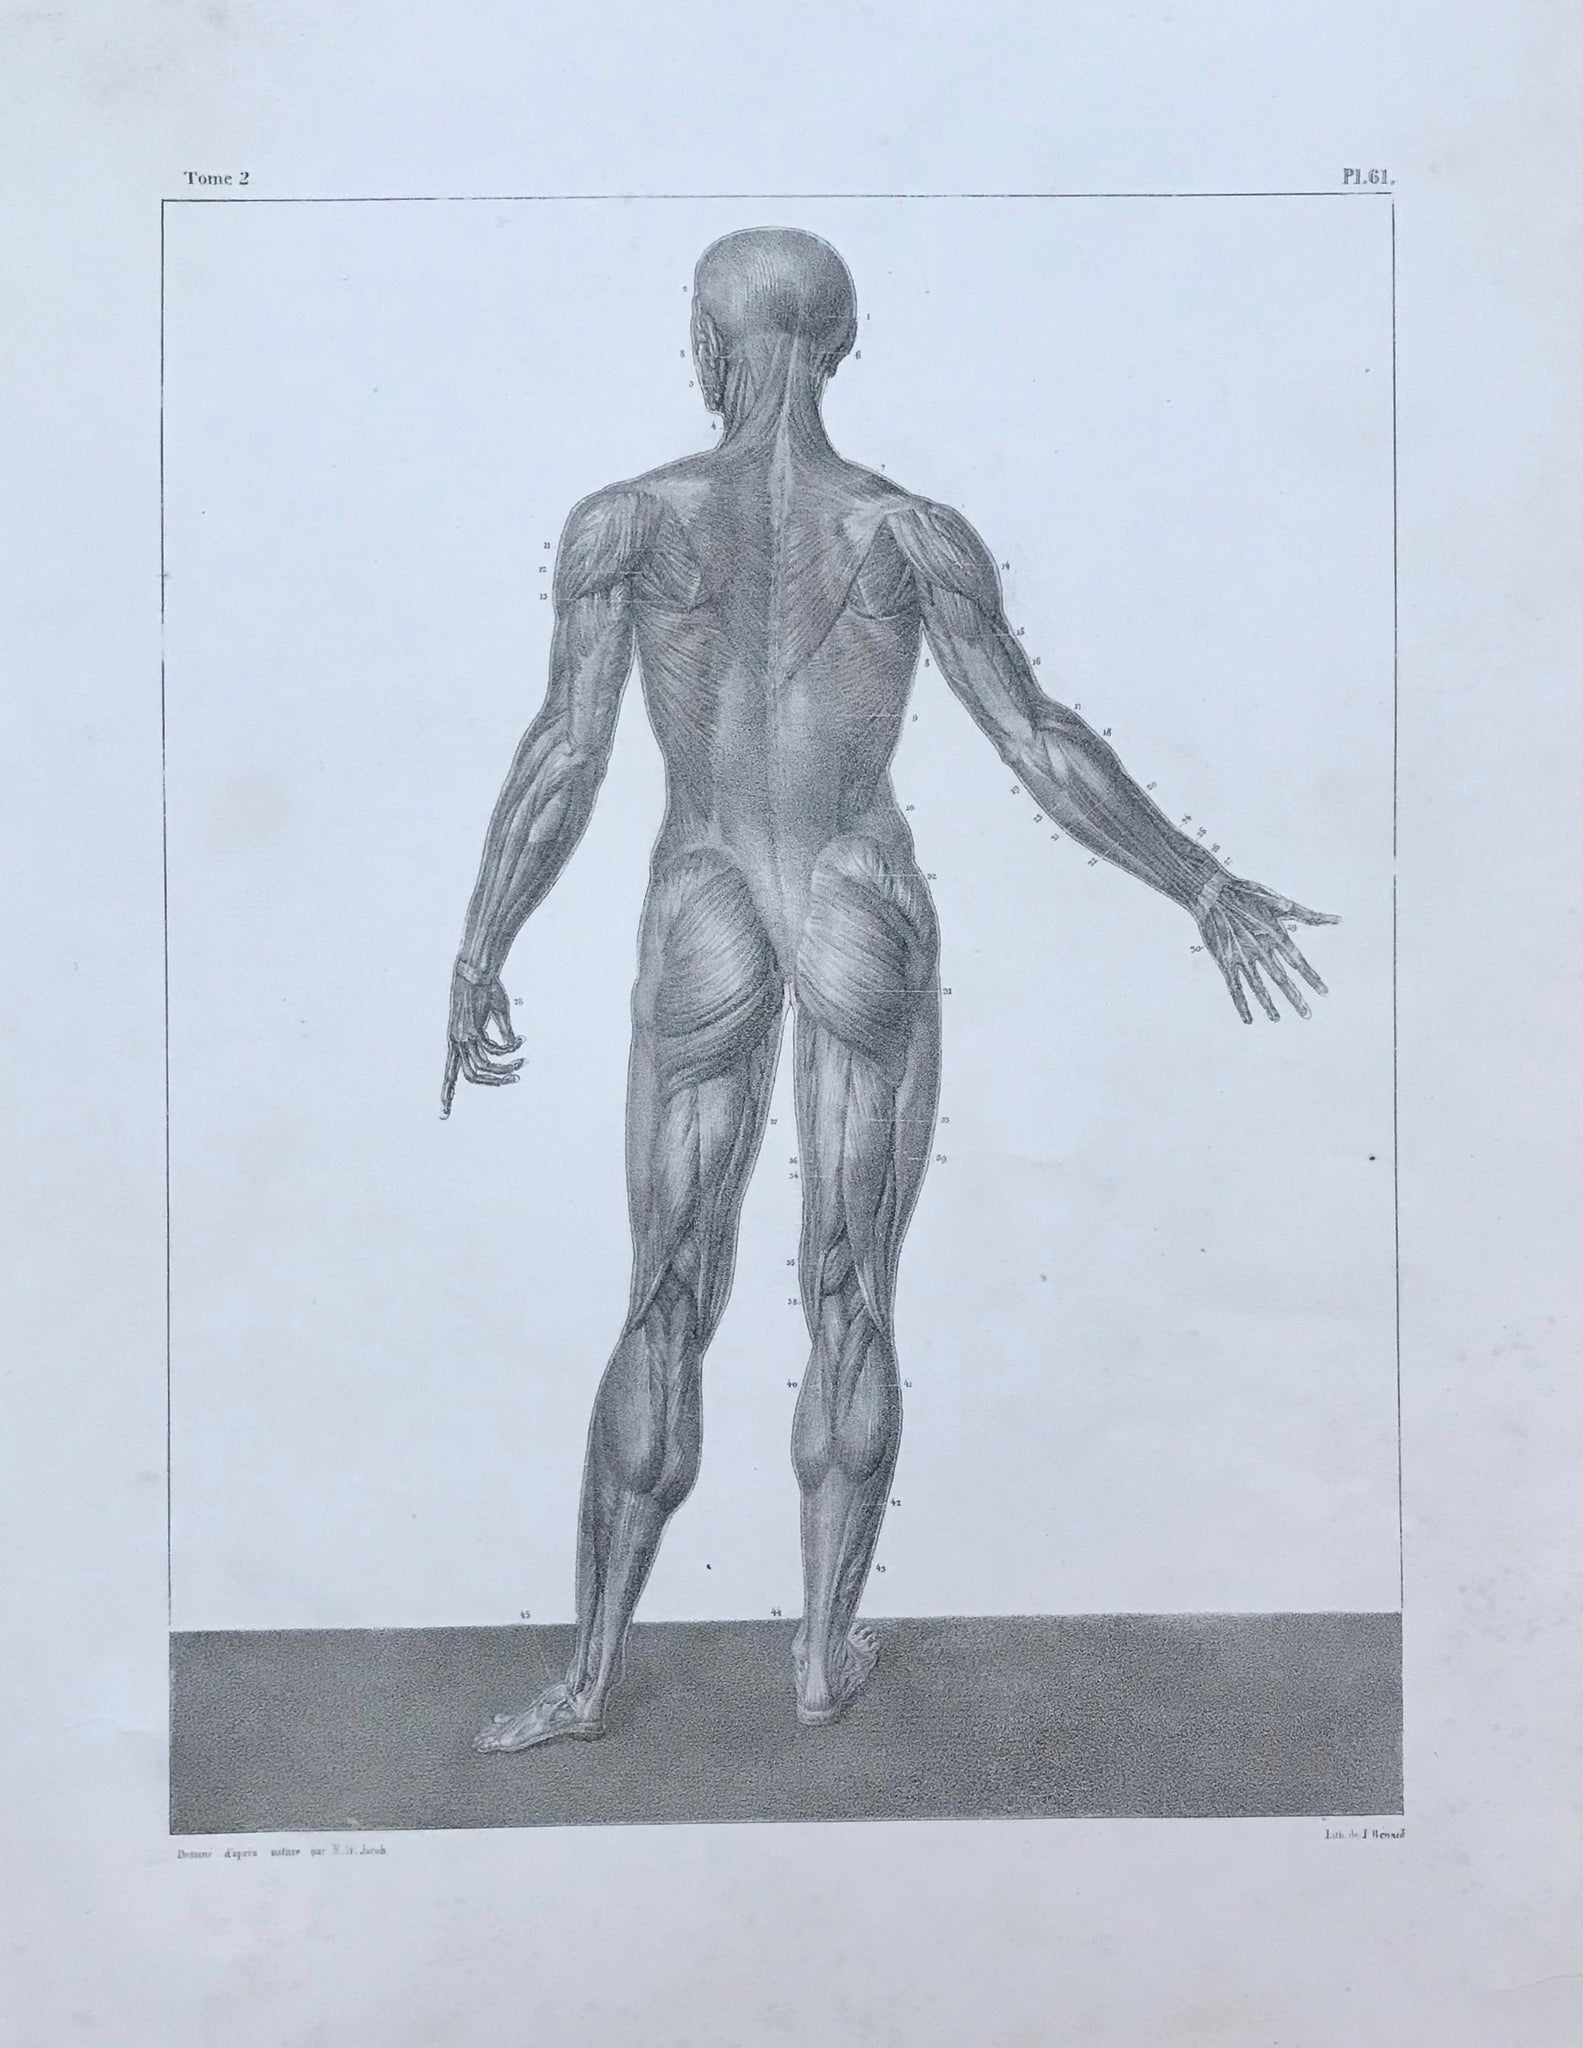 Anatomy. - No Title. muscles of the human male body. Rear view.  Volume 2, page 61 of an unknown book.  Lithograph by J. Benard after the drawing by N.H. Jacob. Ca. 1850.  Wide margins. Minimally spotty. Repaired tear in lower right margin and in left margin.